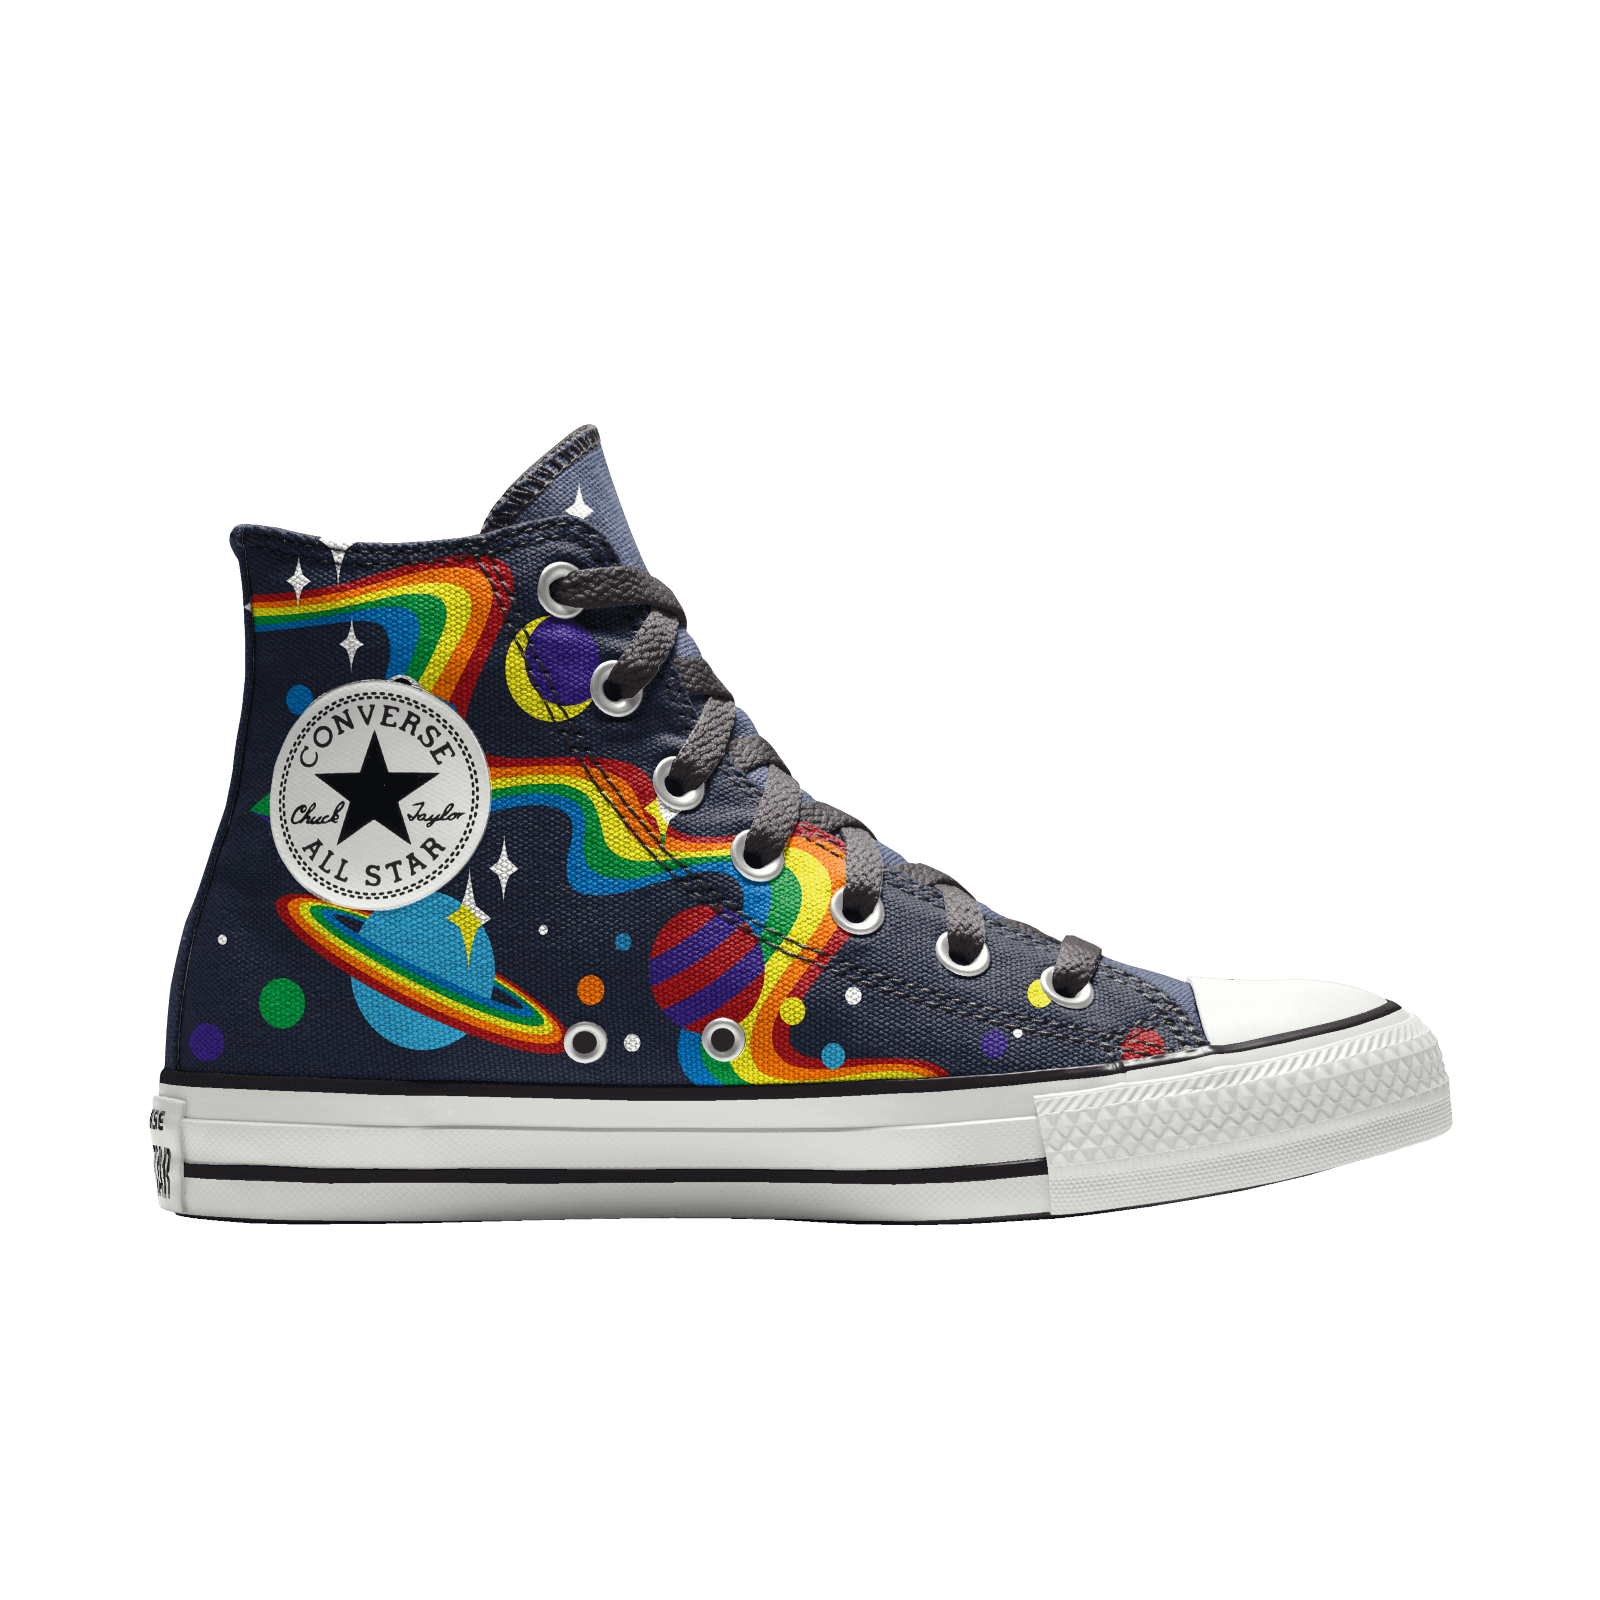 CNK-Converse-Pride-2021-Collection-Rocio-All-Star-High-Shoe.png